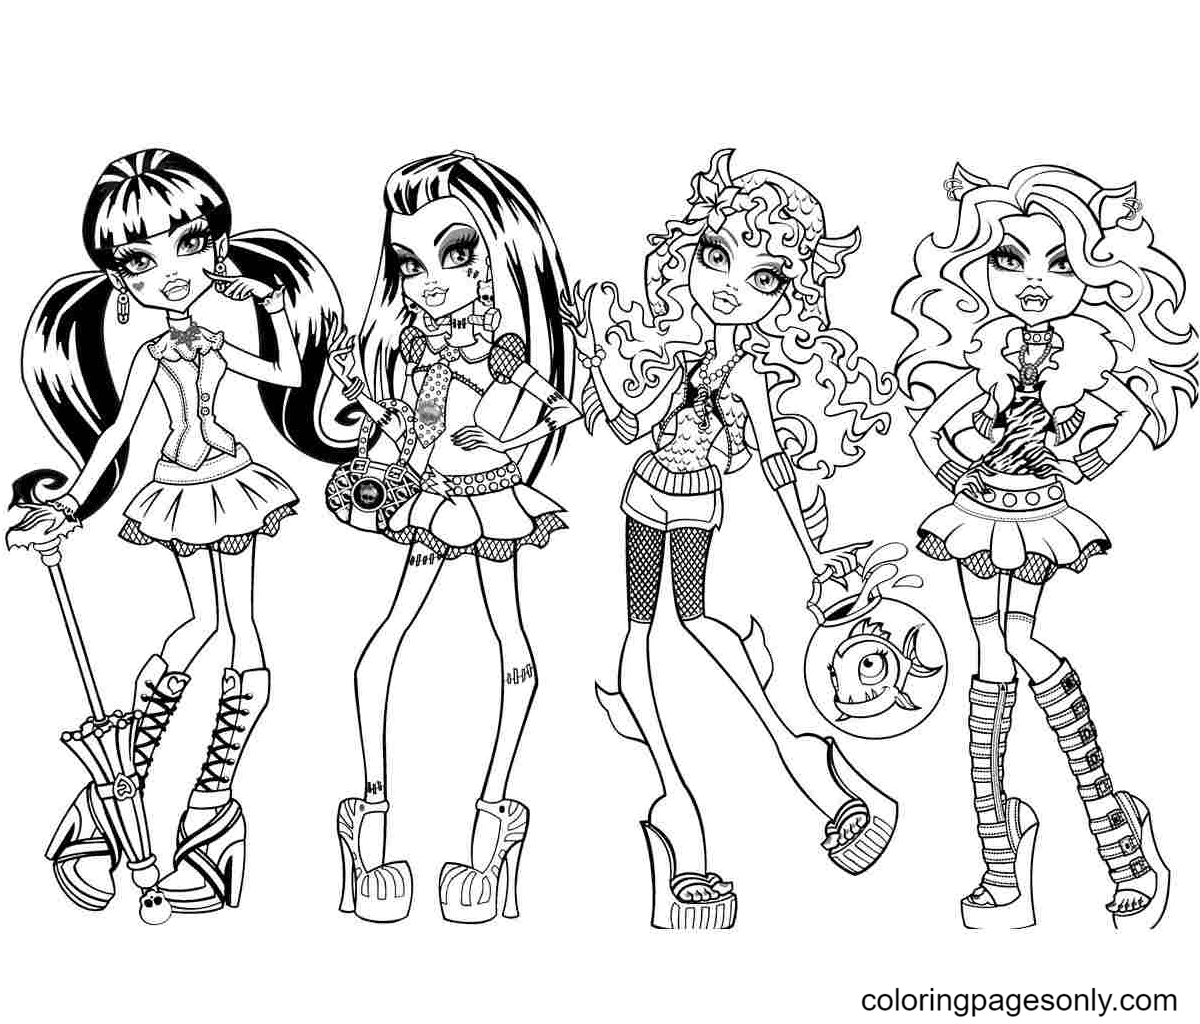 monster high lagoona blue coloring pages